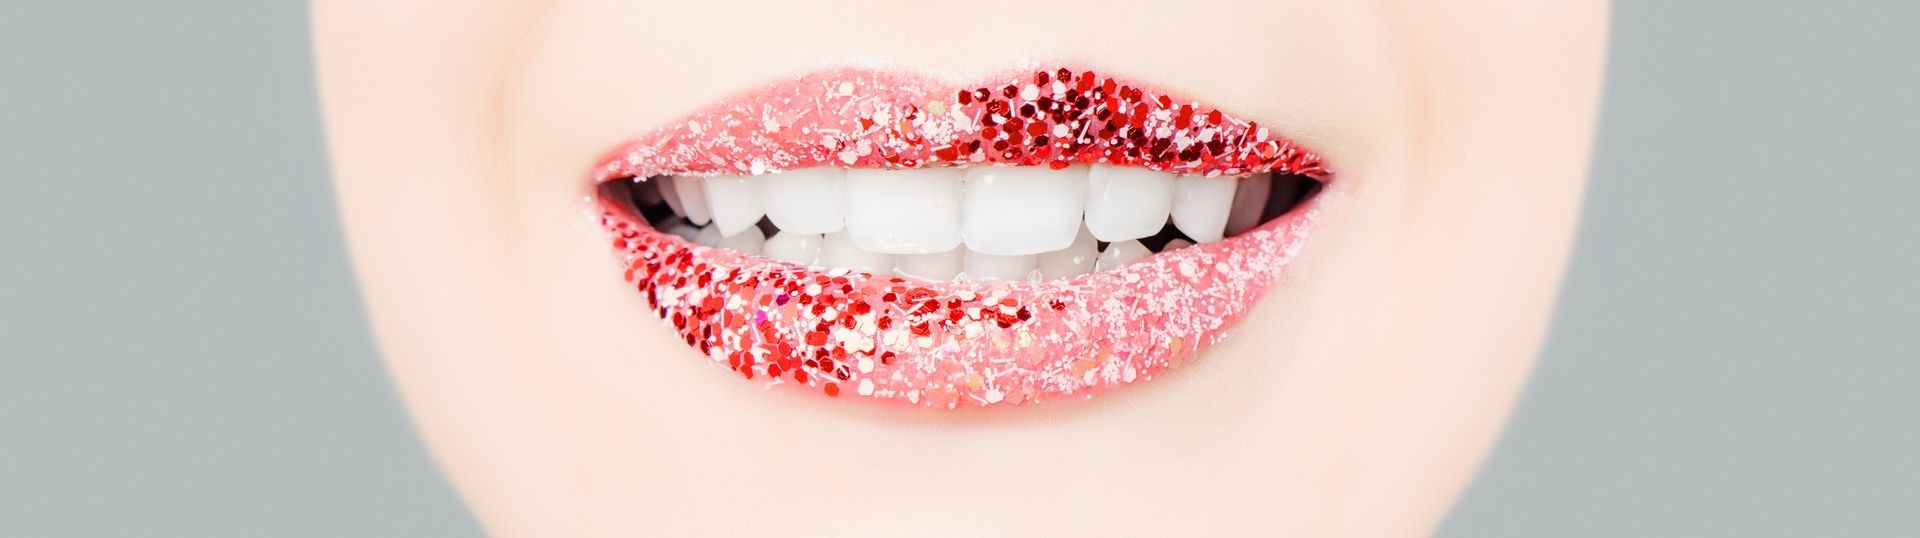 Perfect smile with red lips and white healthy teeth. Female mouth with glitter lipstick makeup 